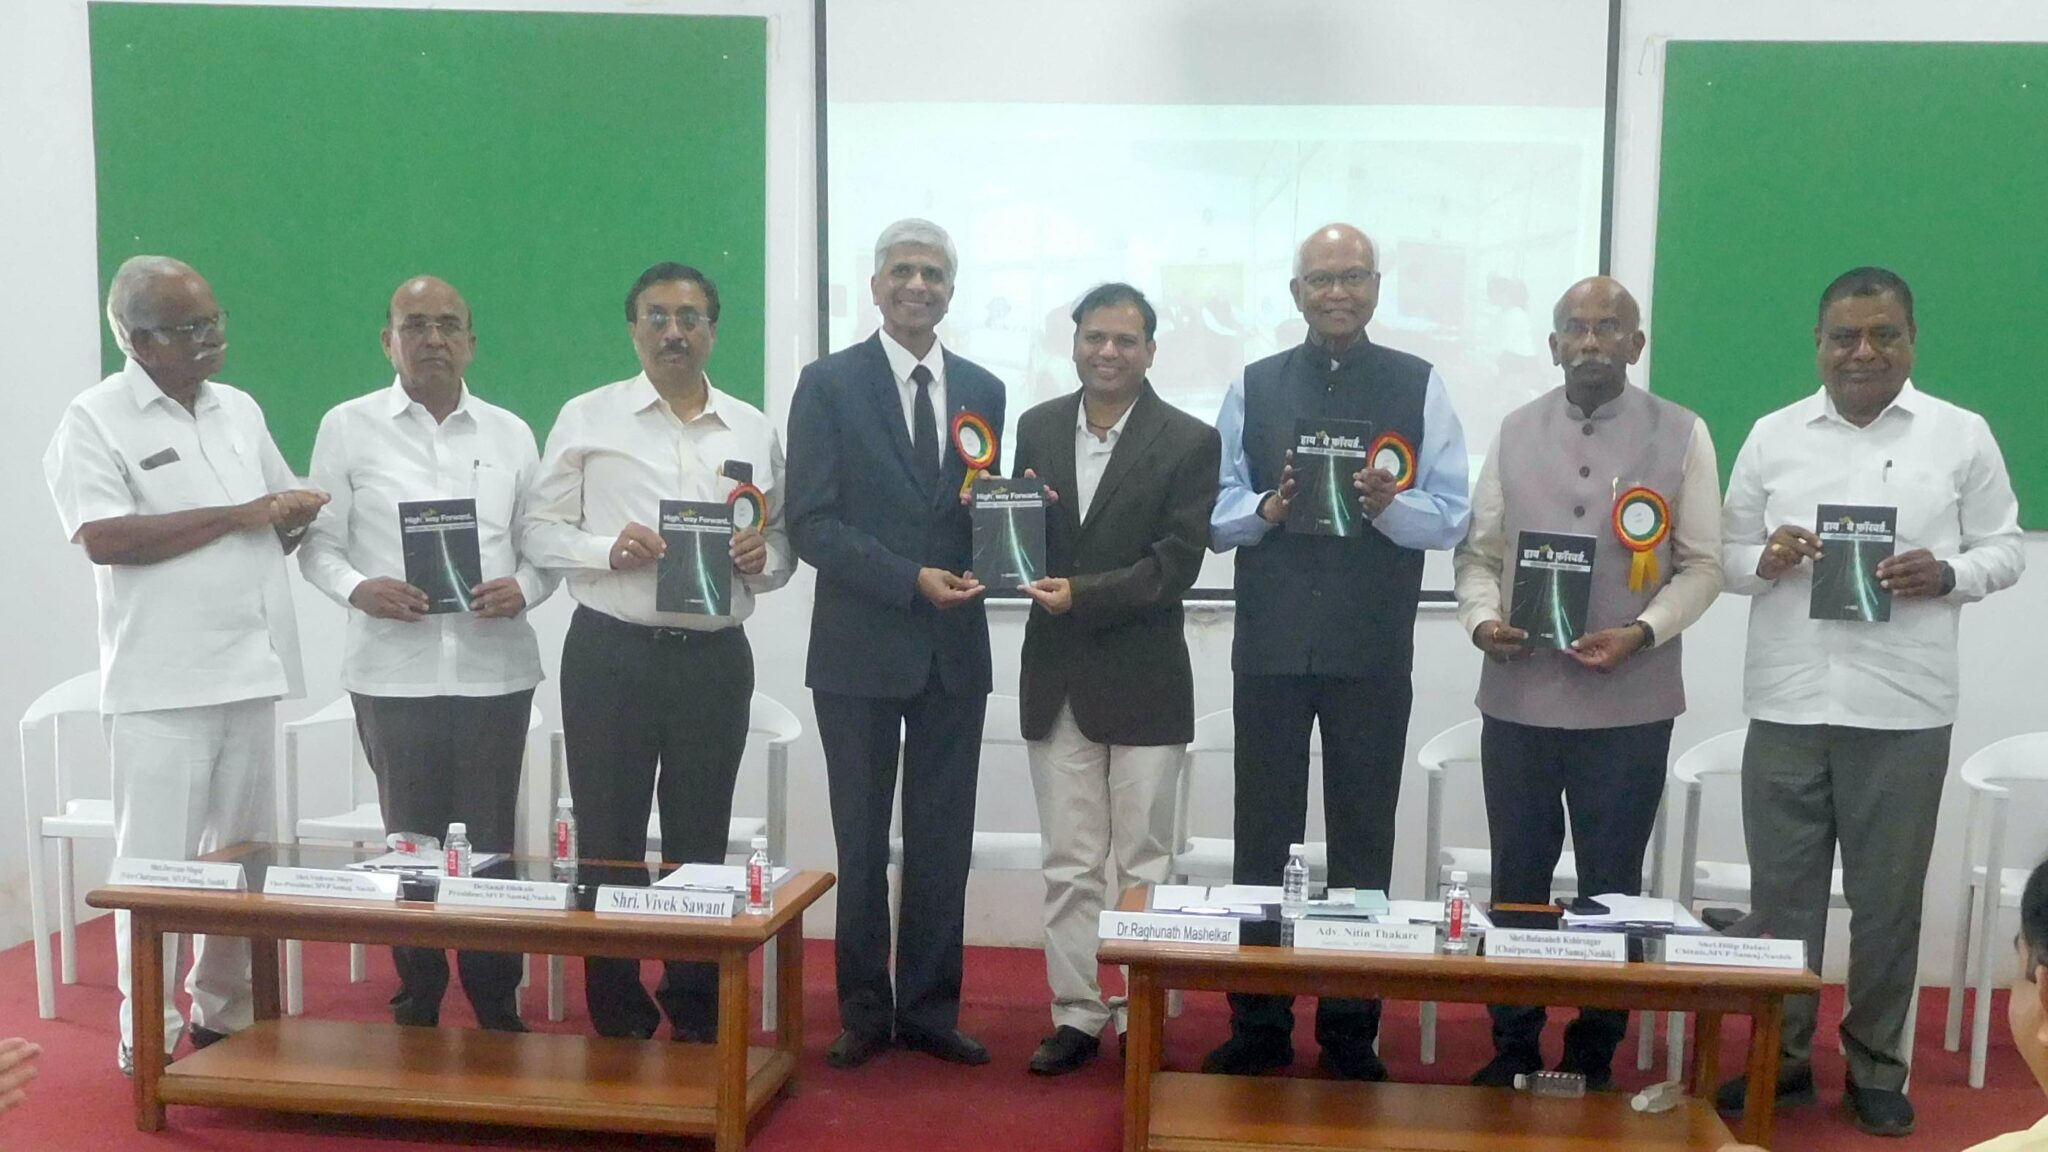 Distinguished scientist Dr. Raghunath Mashelkar and acclaimed educationist Mr. Vivek Savant while publishing the book "High-tech Way Forward," authored by Sunil Khandbahale, marking the special occasion of National Science Day, February 28, 2024.